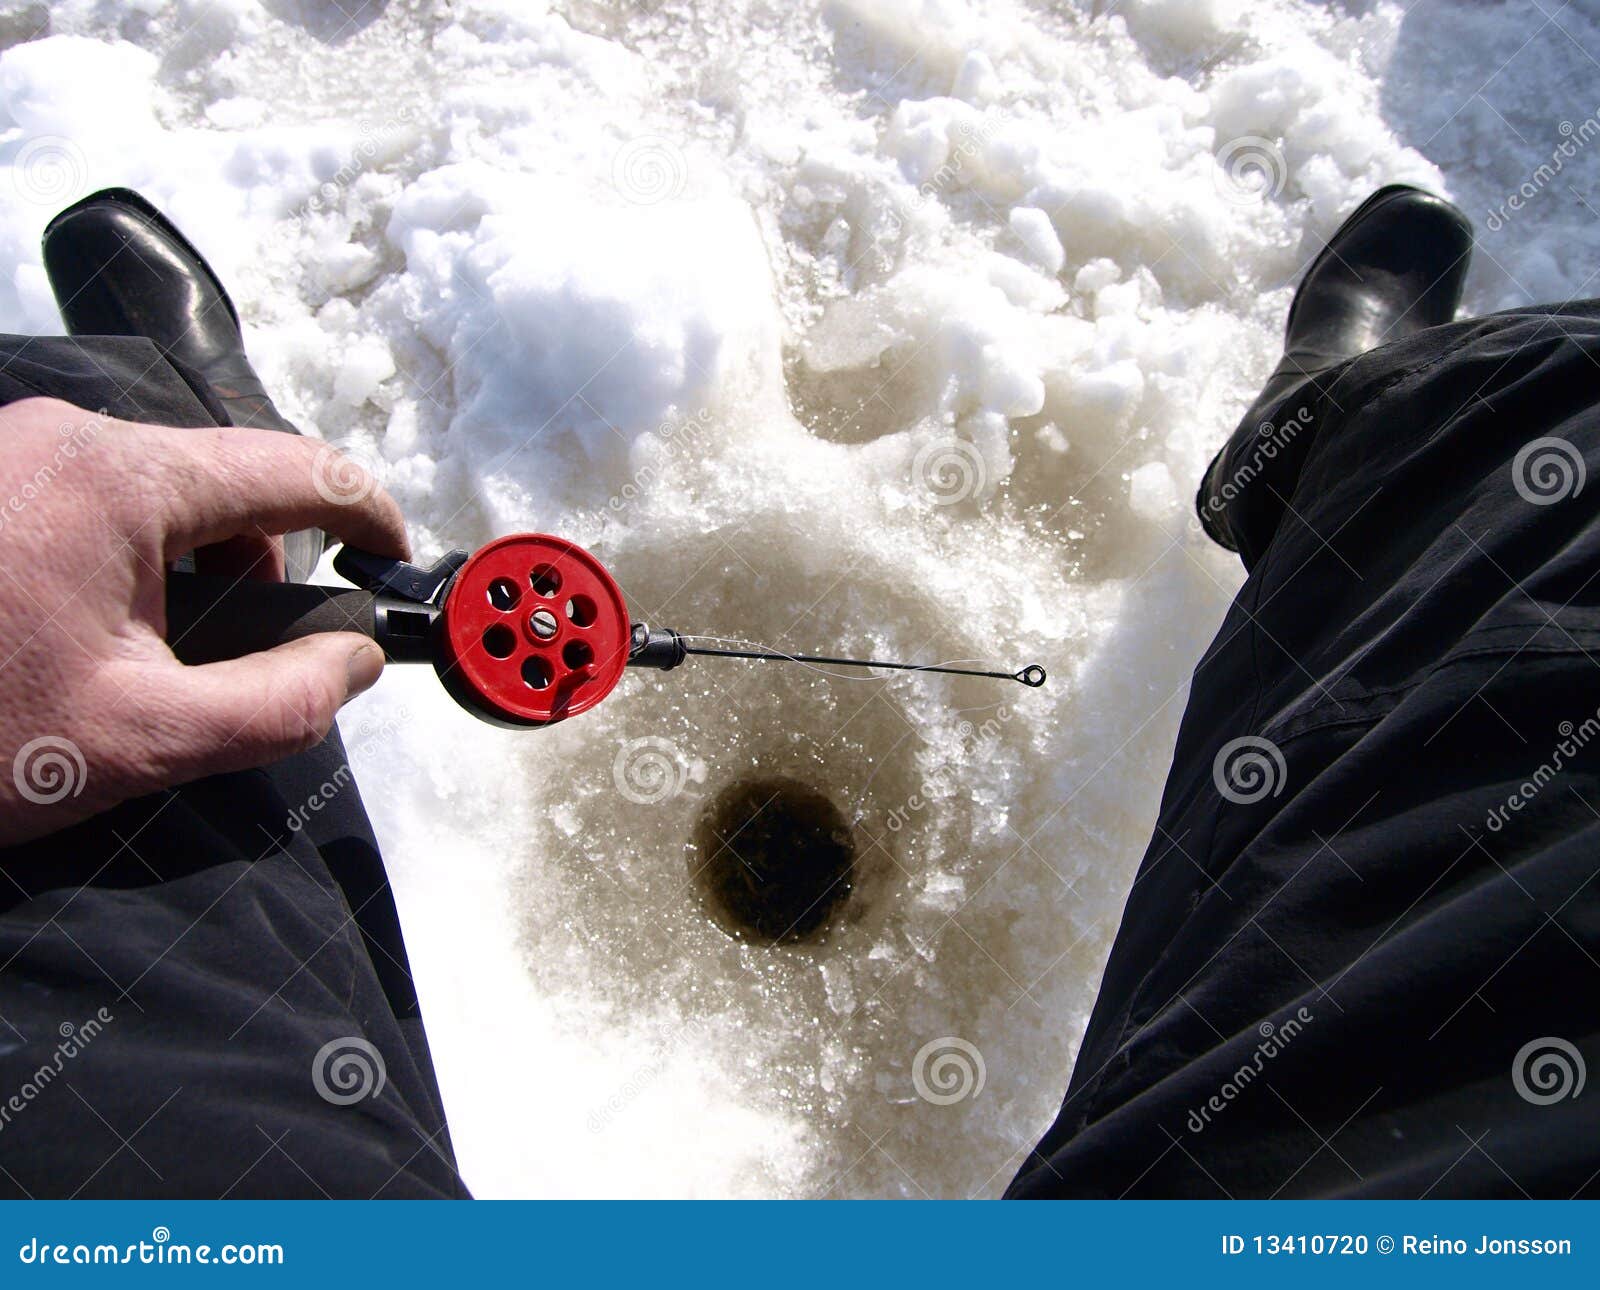 3,733 Ice Fishing Equipment Stock Photos - Free & Royalty-Free Stock Photos  from Dreamstime